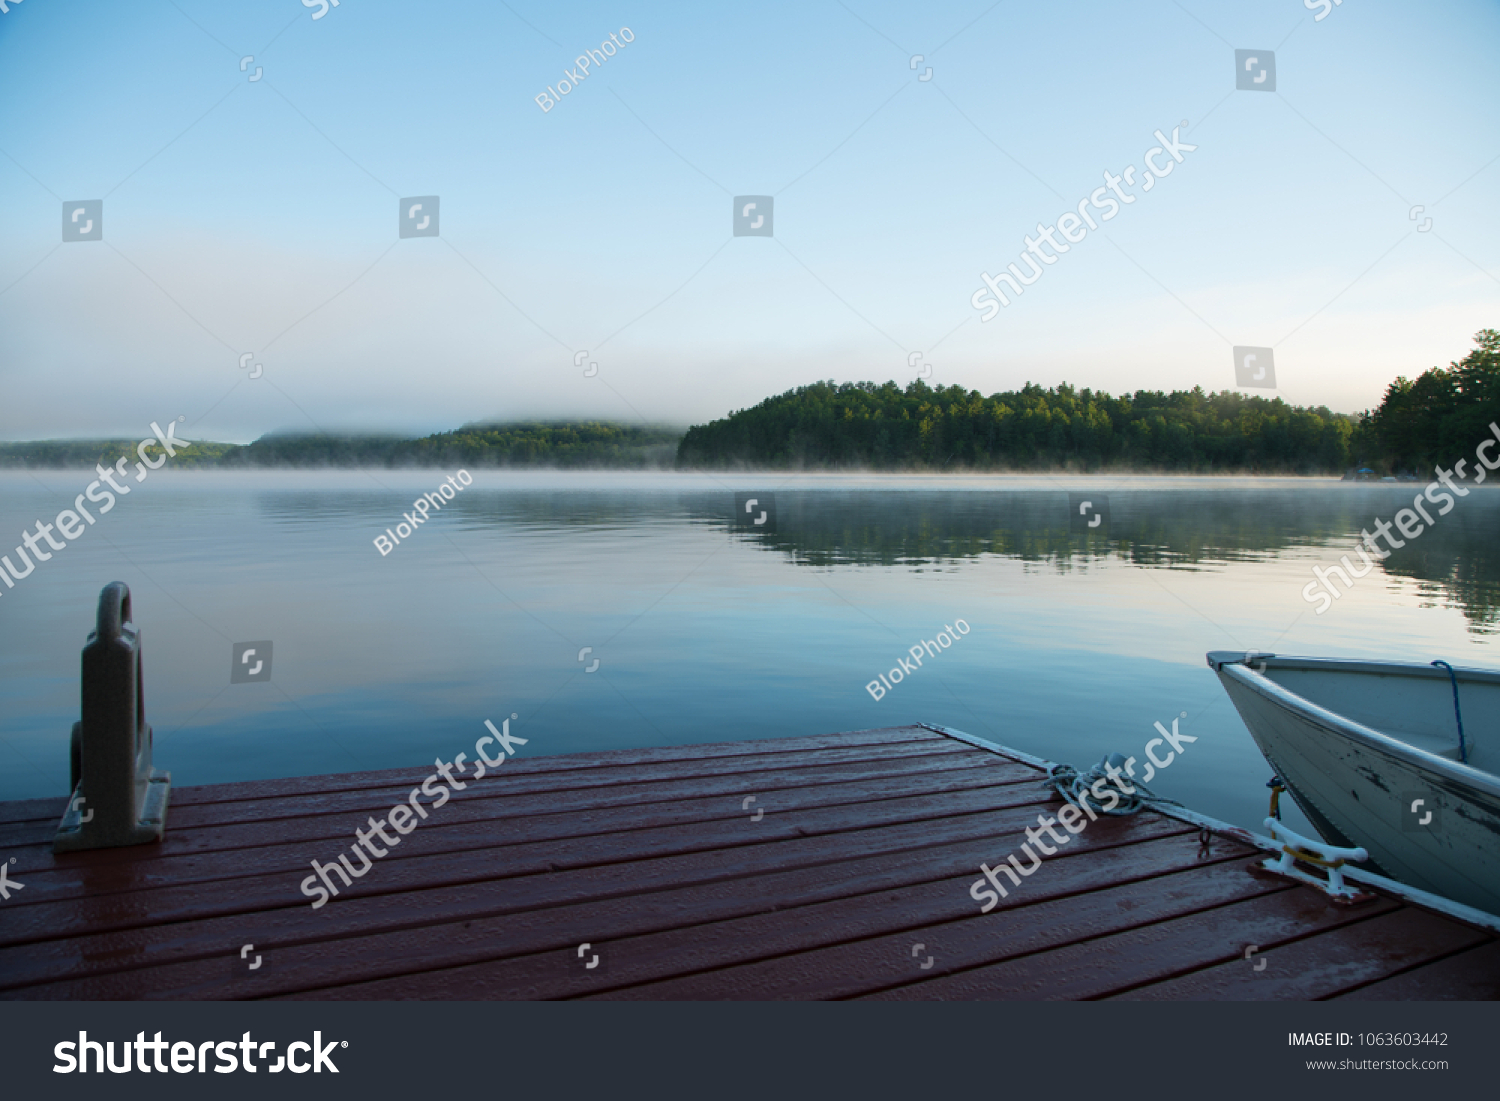 A lakeside dock and fishing boat on an Ontario lake in the morning mist #1063603442